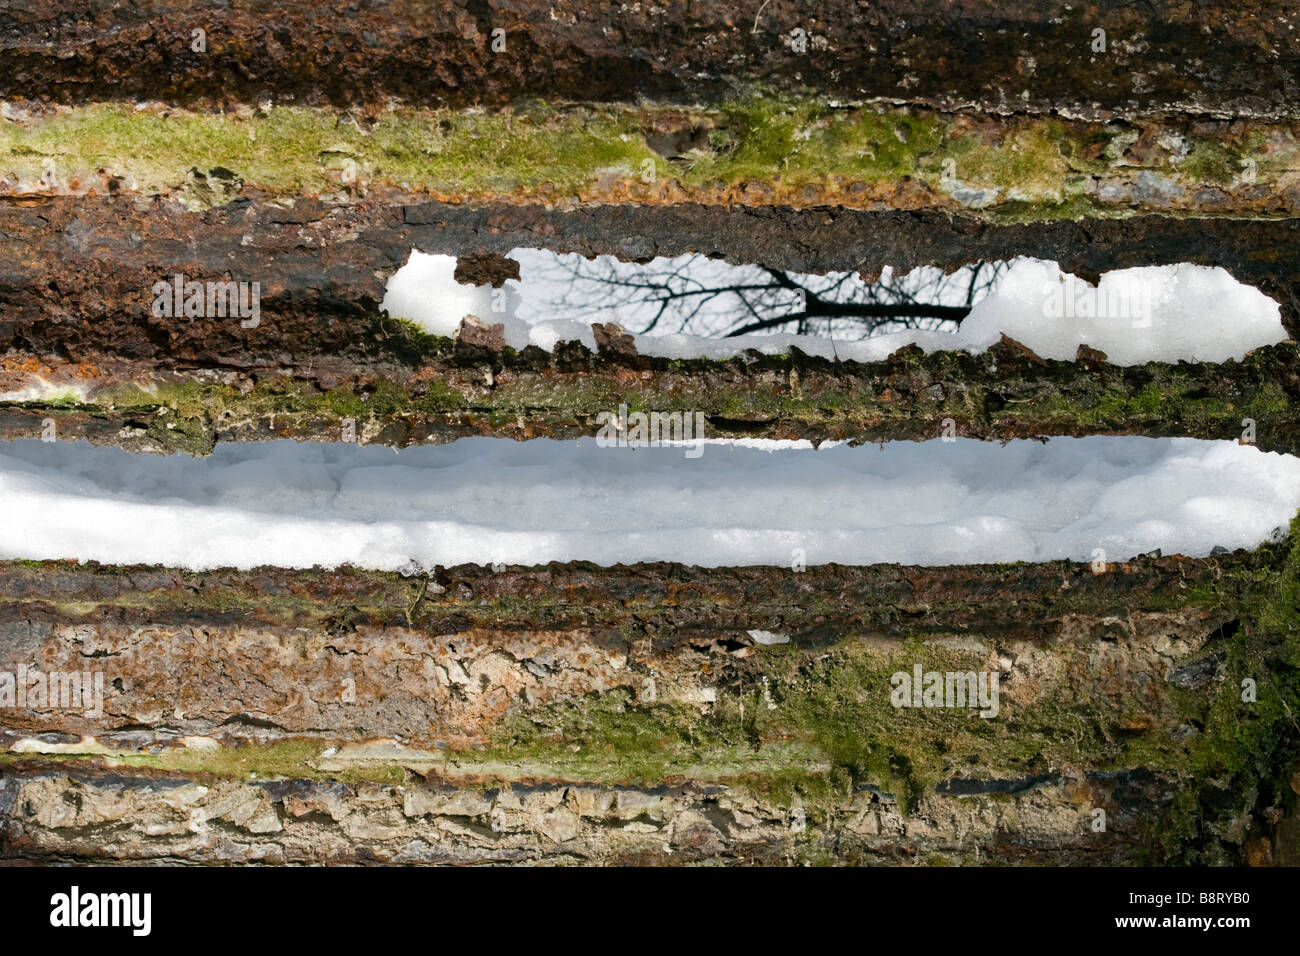 View through the hole in old metal bridge decking covered with snow on leafless tree branch. Stock Photo